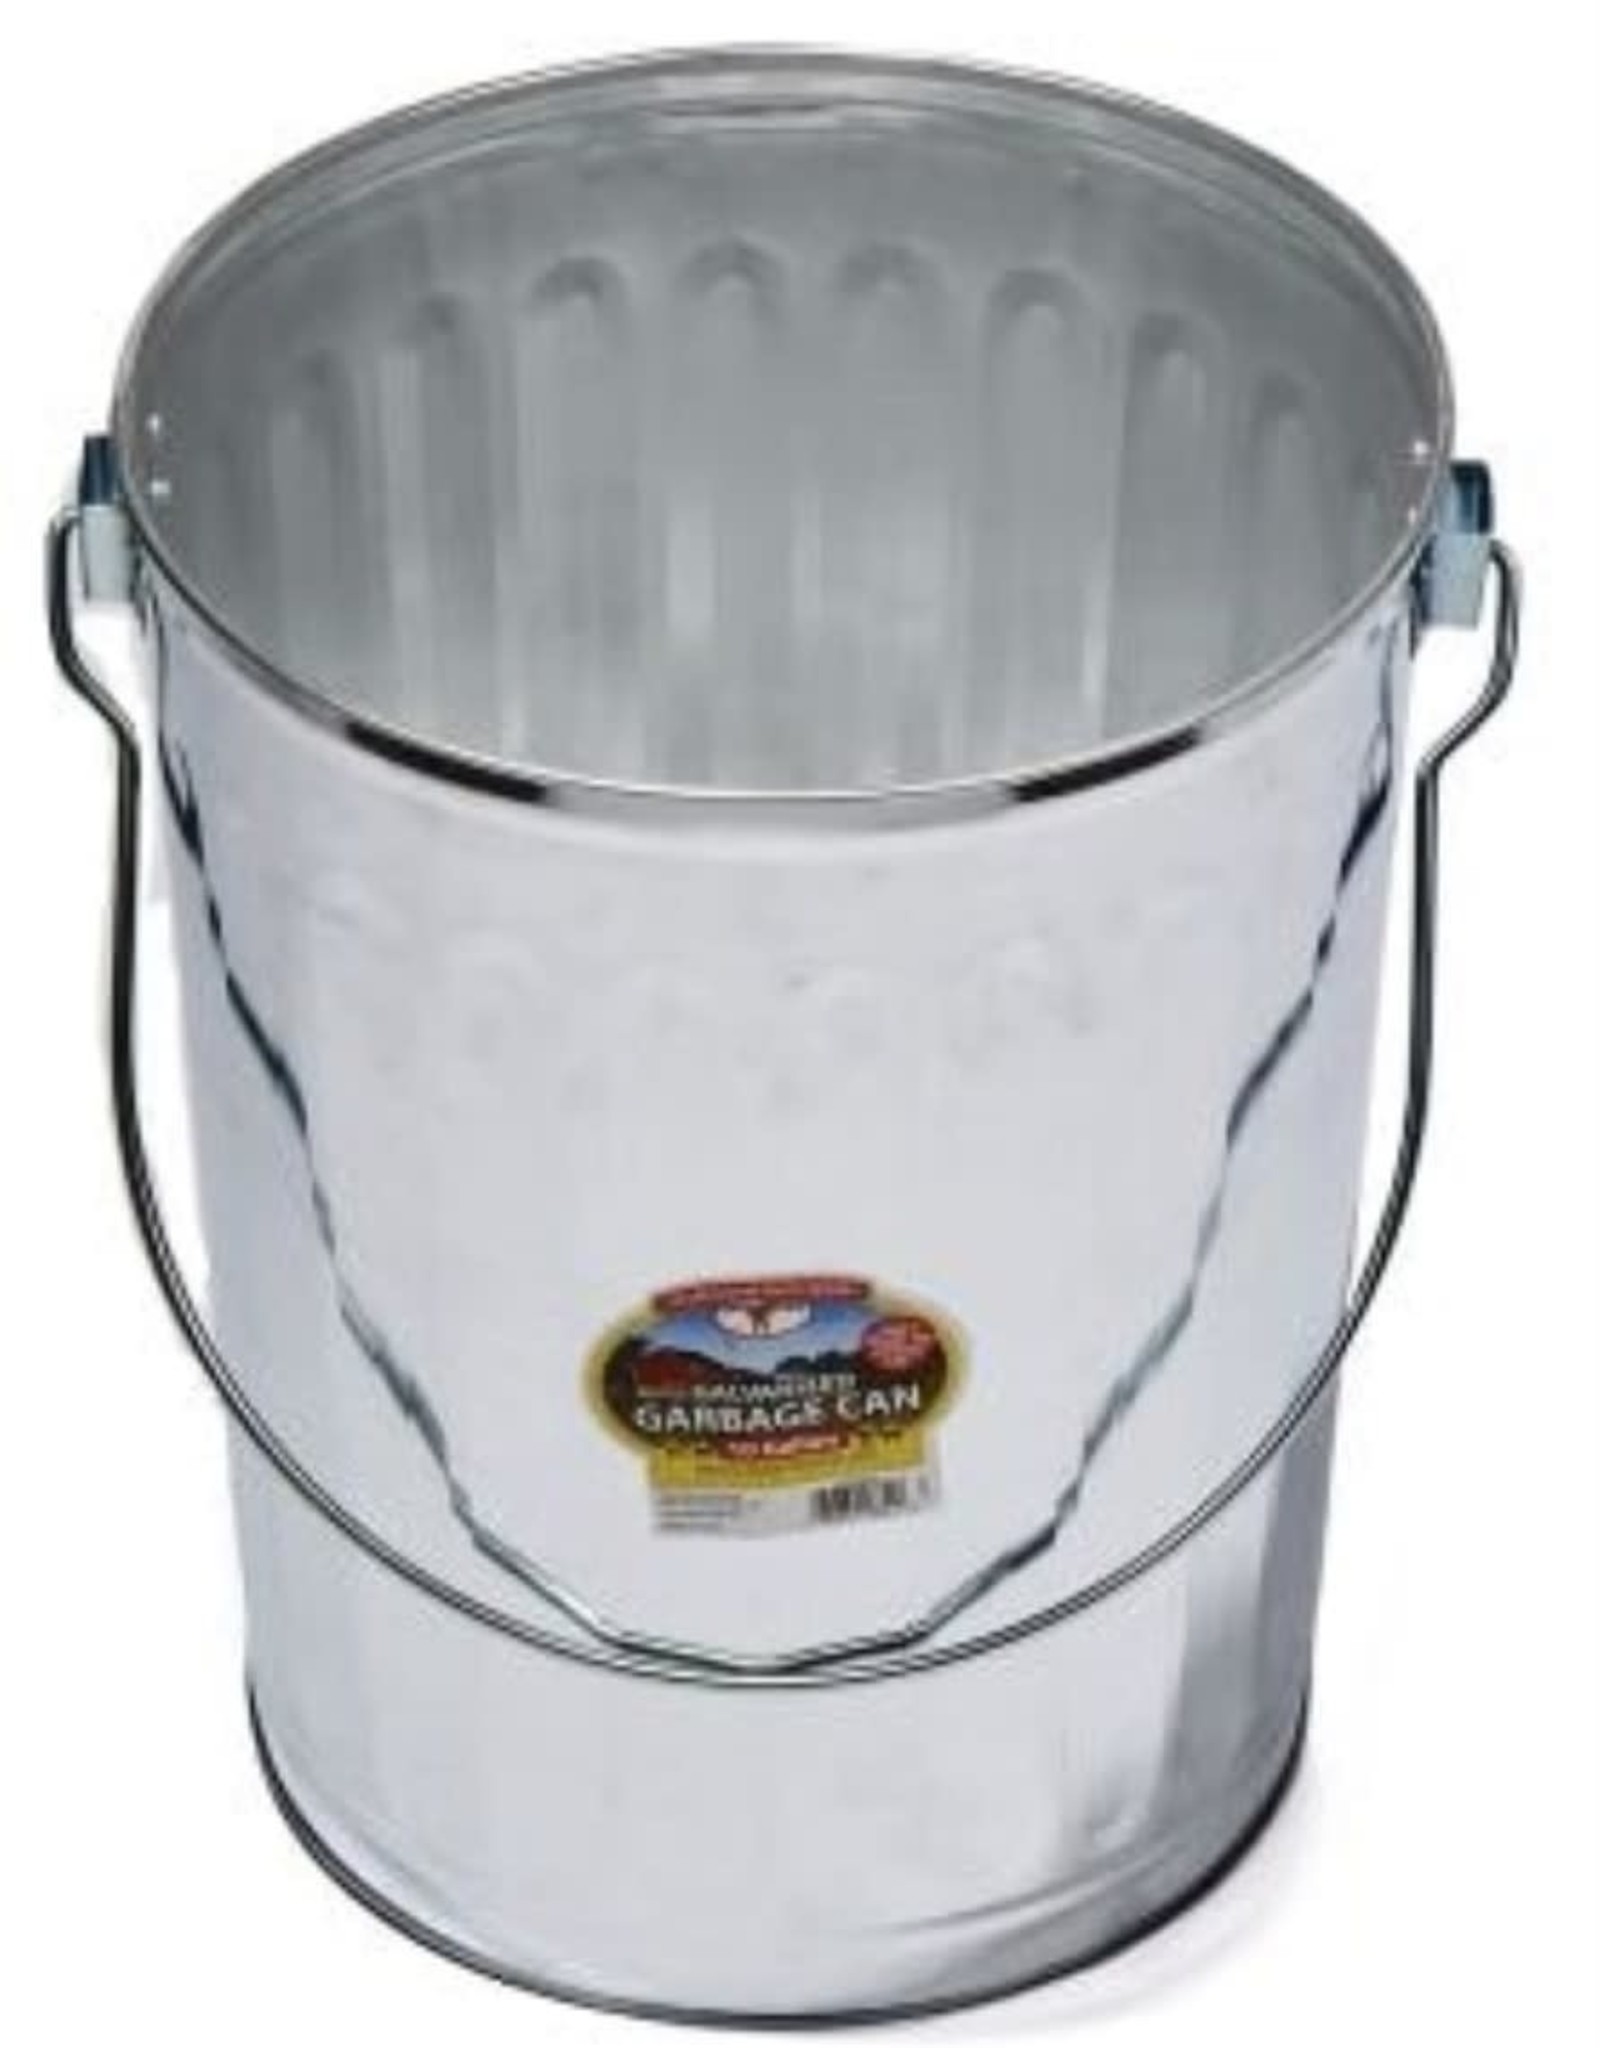 MILLER MFG CO INC Garbage / Trash Can ONLY no lid  10 gal